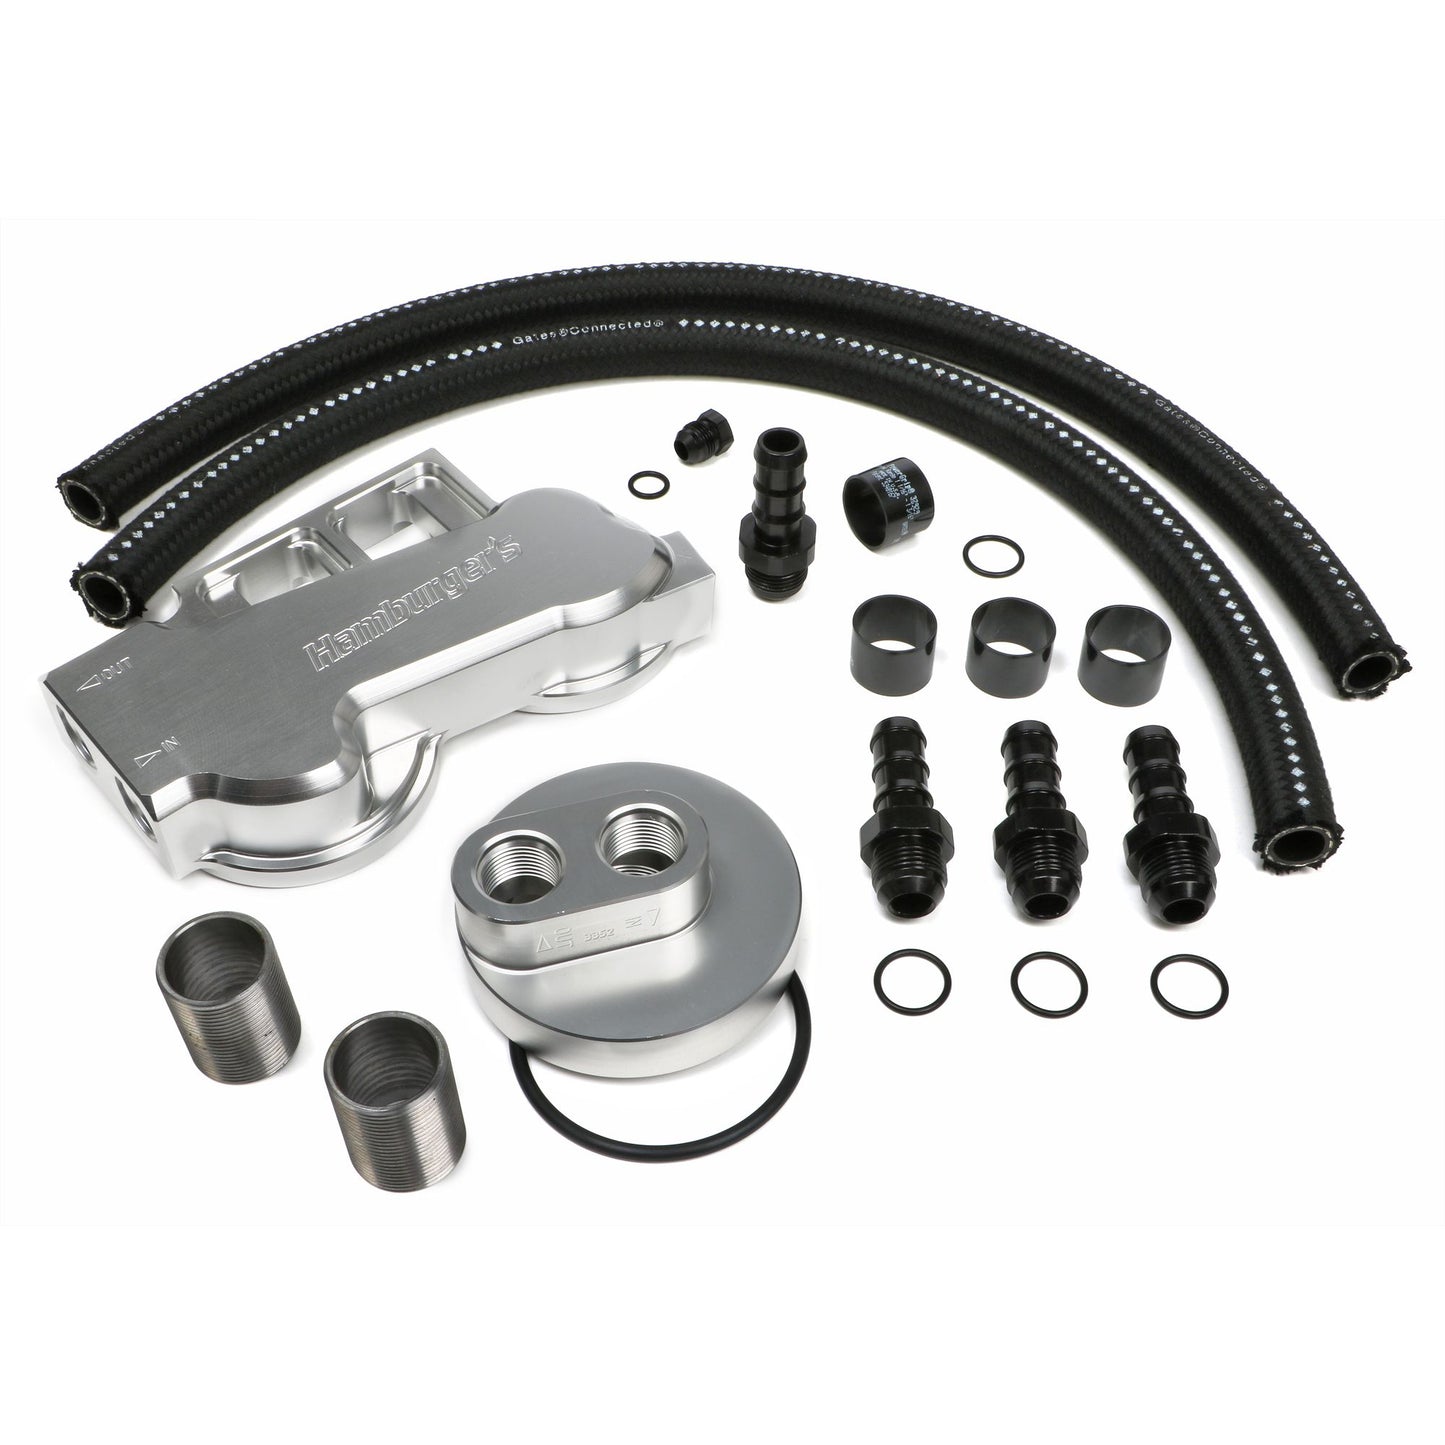 HAMBURGER'S PERFORMANCE PRODUCTS BILLET ALUMINUM TRUE-DUAL DOUBLE OIL FILTER RELOCATION KIT; HORIZONTAL PORT; 3-1/2 IN. I.D. 4-11/16 IN. O.D. OIL FILTER FLANGE; 1-1/2 IN.-12 NIPPLE- FORD DIESEL WITH 1 1/2-12 THREADS 3389